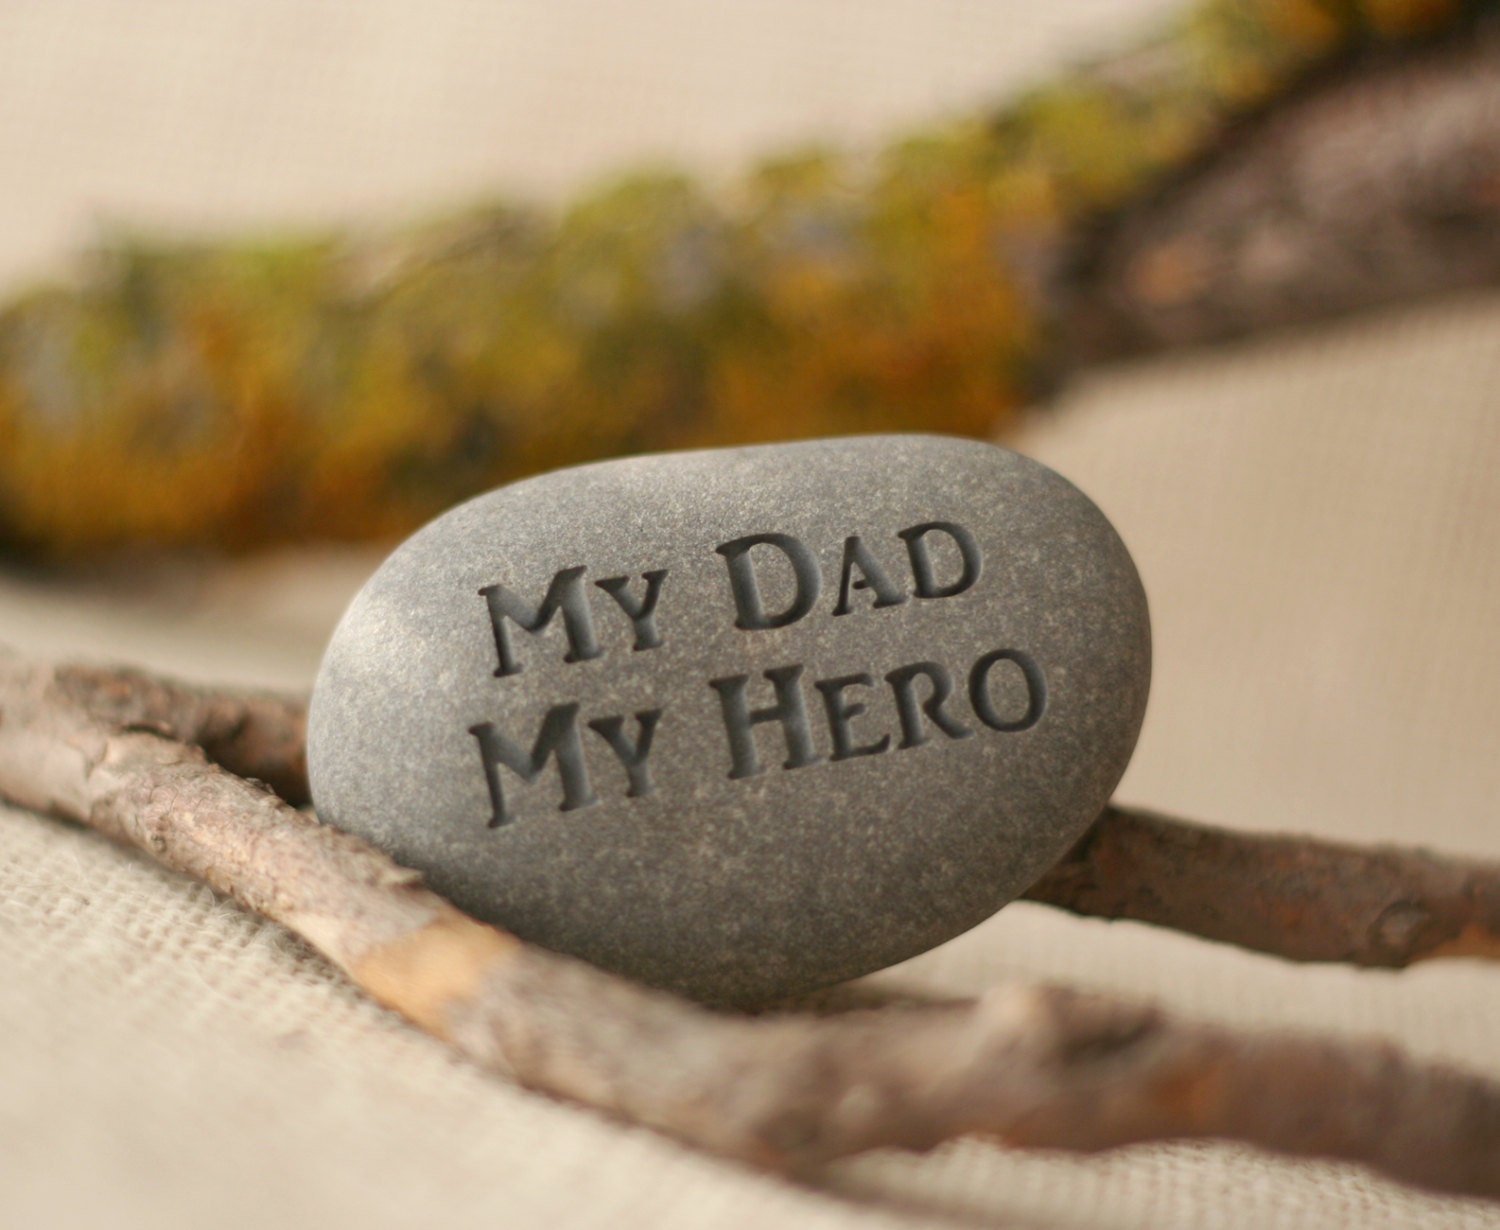 Dad is back. My dad my Hero. Мой Daddy. Daddy is my Hero. Father's Day.